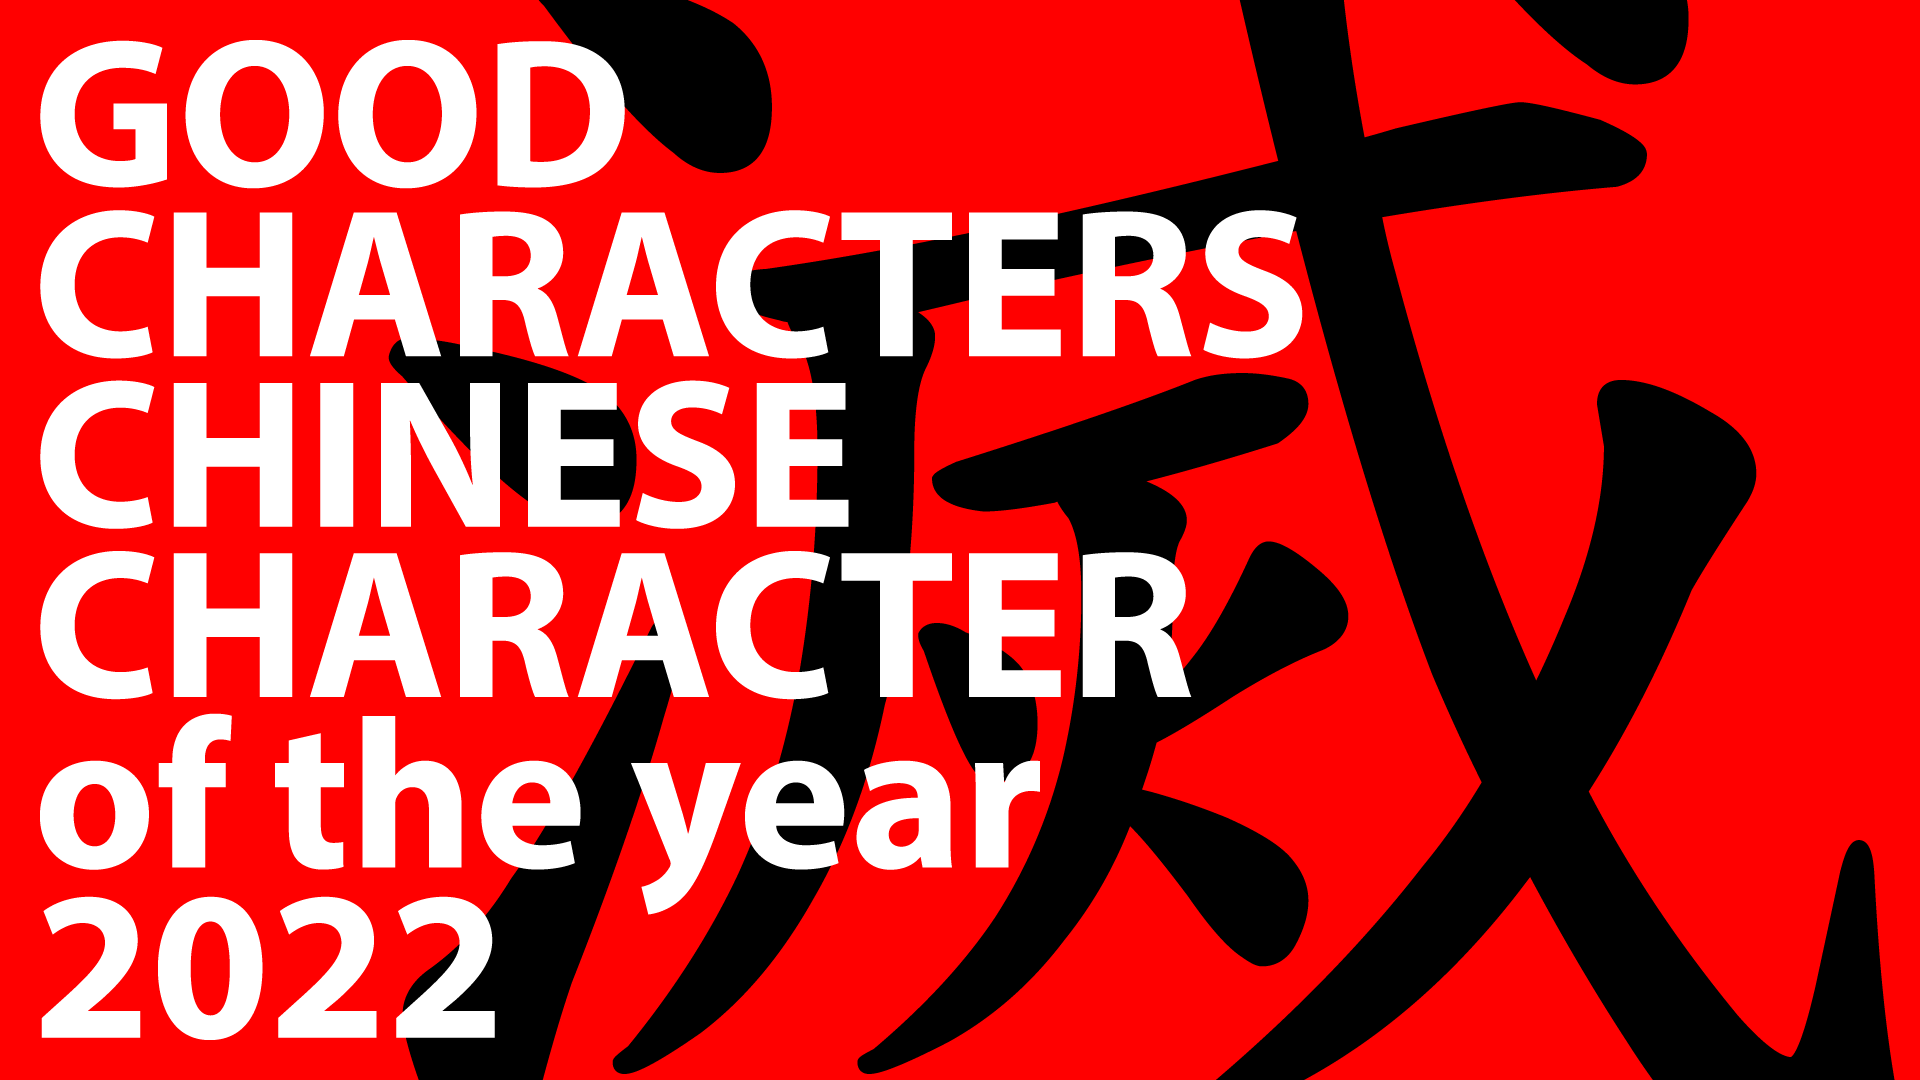 Load video: 滅 (miè, pronounced mieh, simplified: 灭) is the Good Characters Chinese Character of the Year 2022. It means to extinguish, to exterminate, or to perish. It is the single best character to encapsulate this year’s unprecedented challenges.